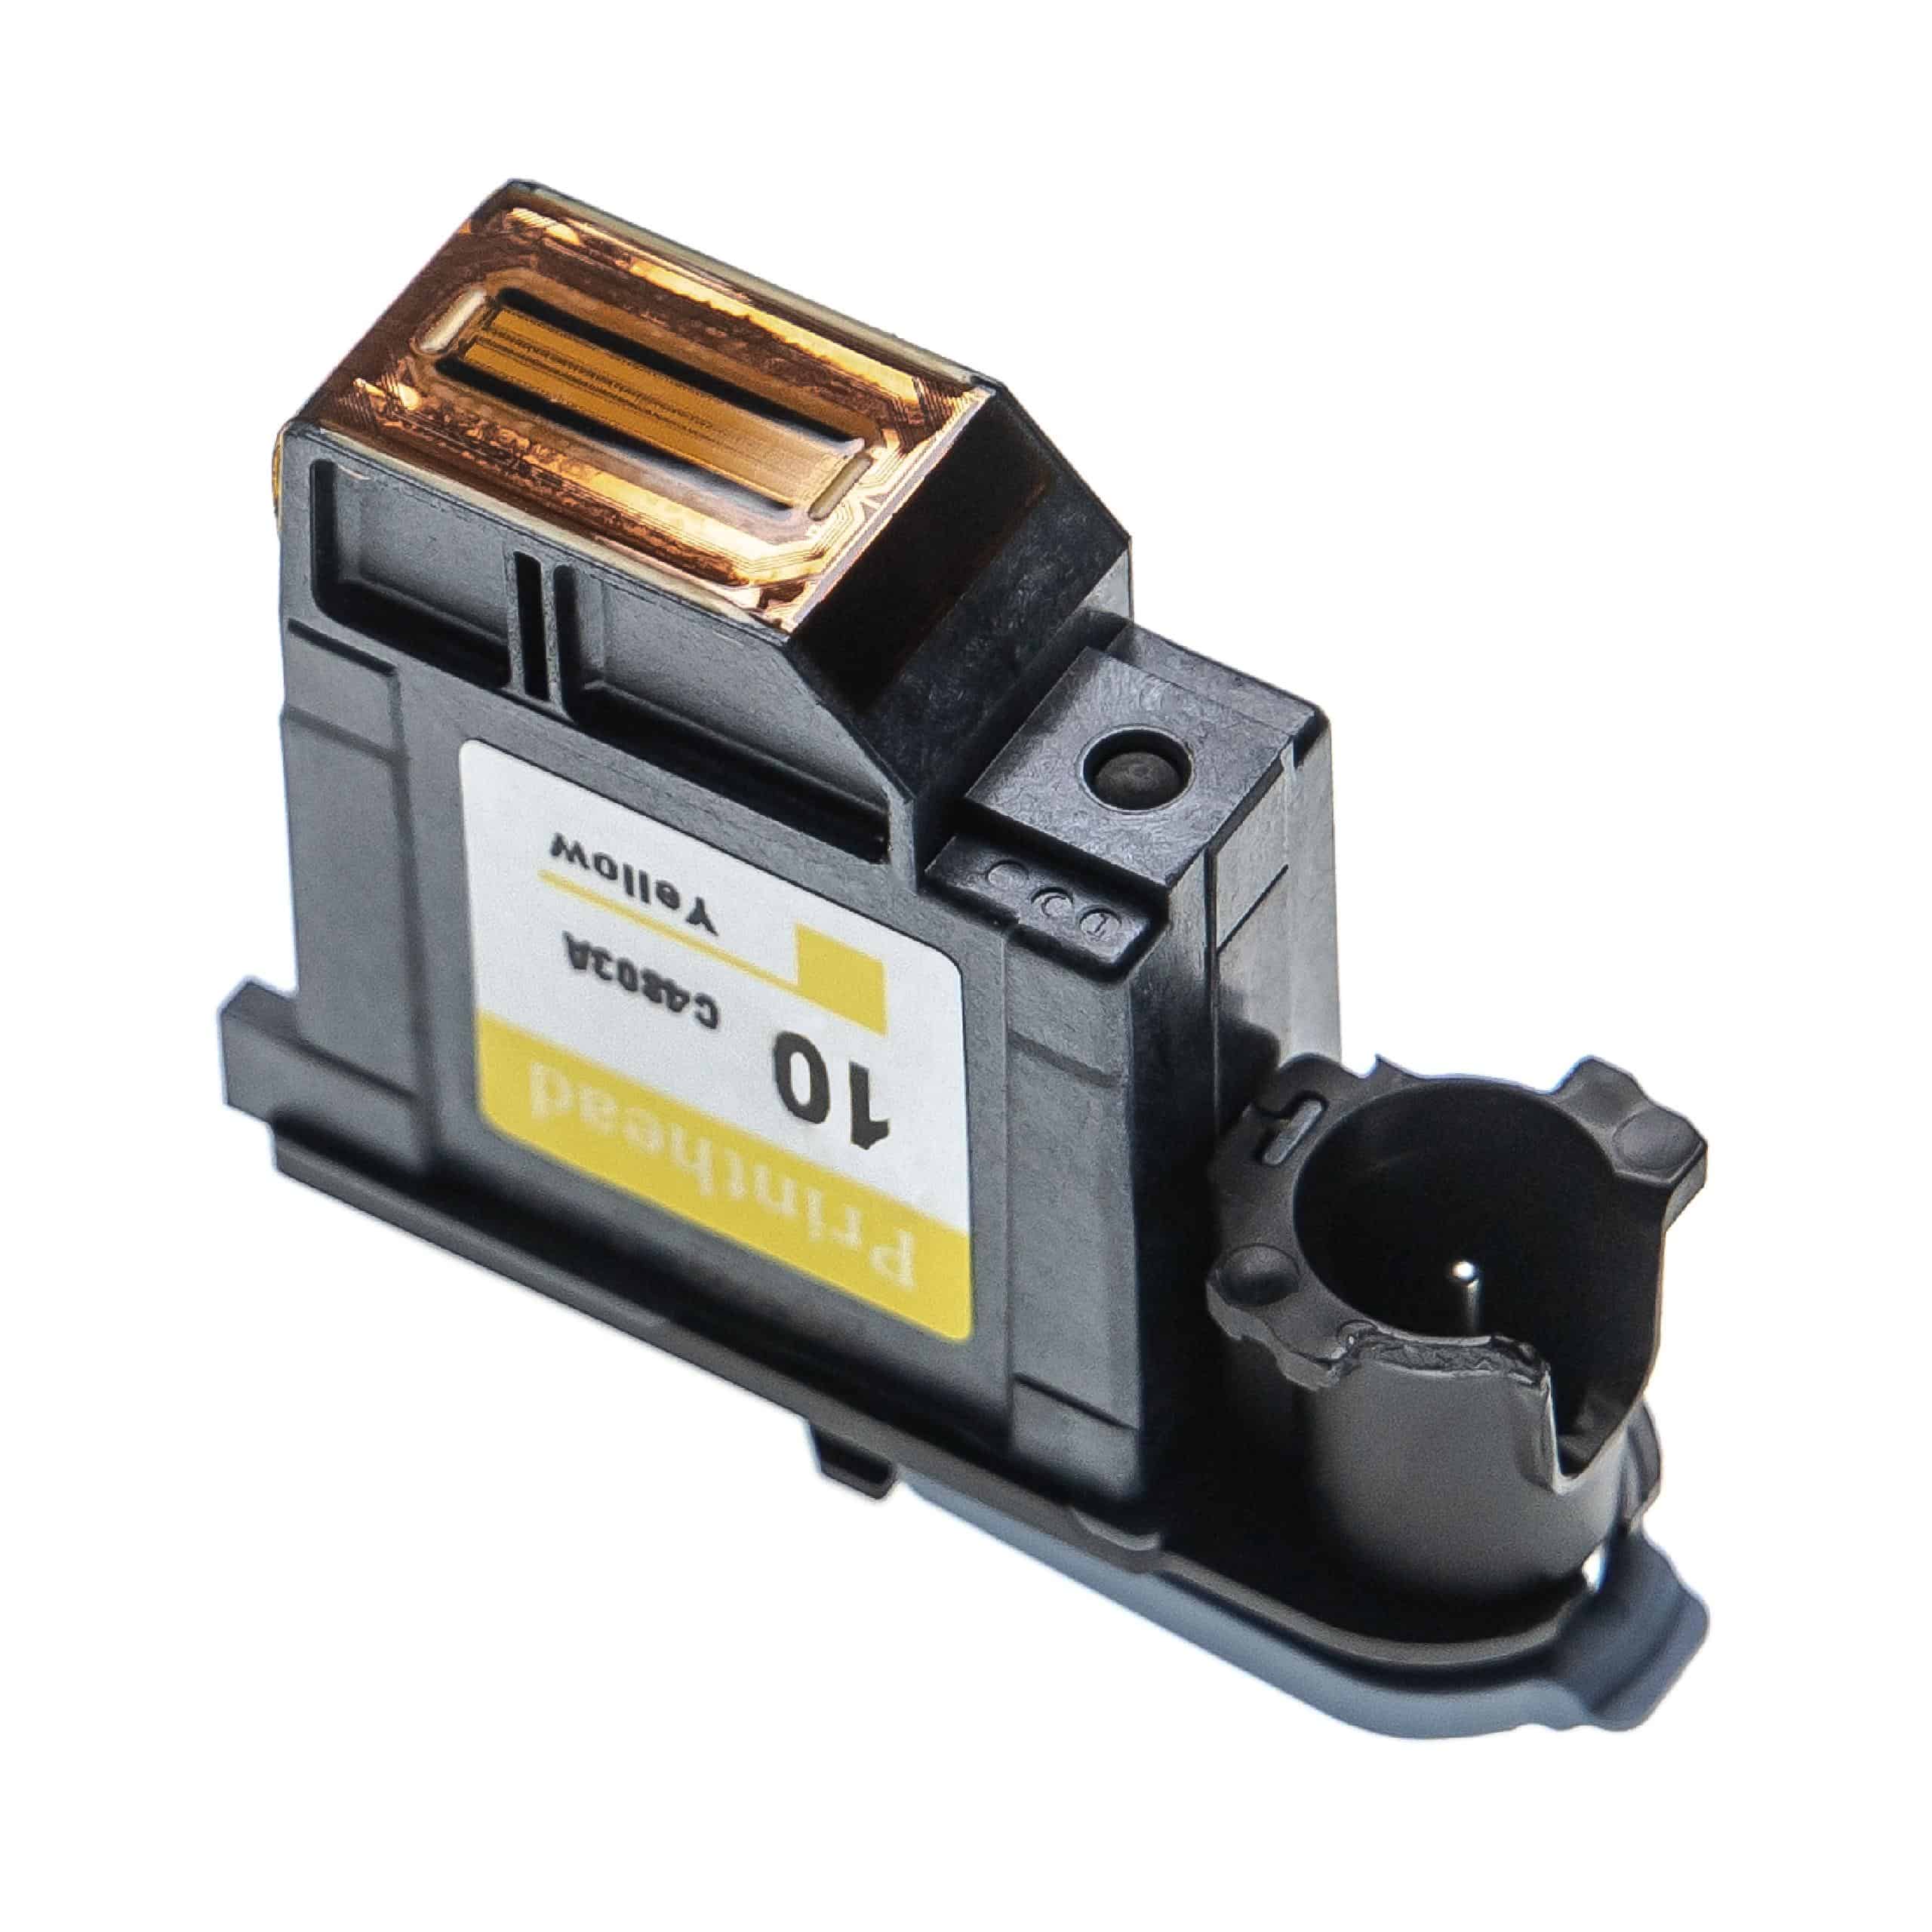 Printhead for HP Business Inkjet HP C4803A Printer - yellow, 5.1 cm wide, Refurbished